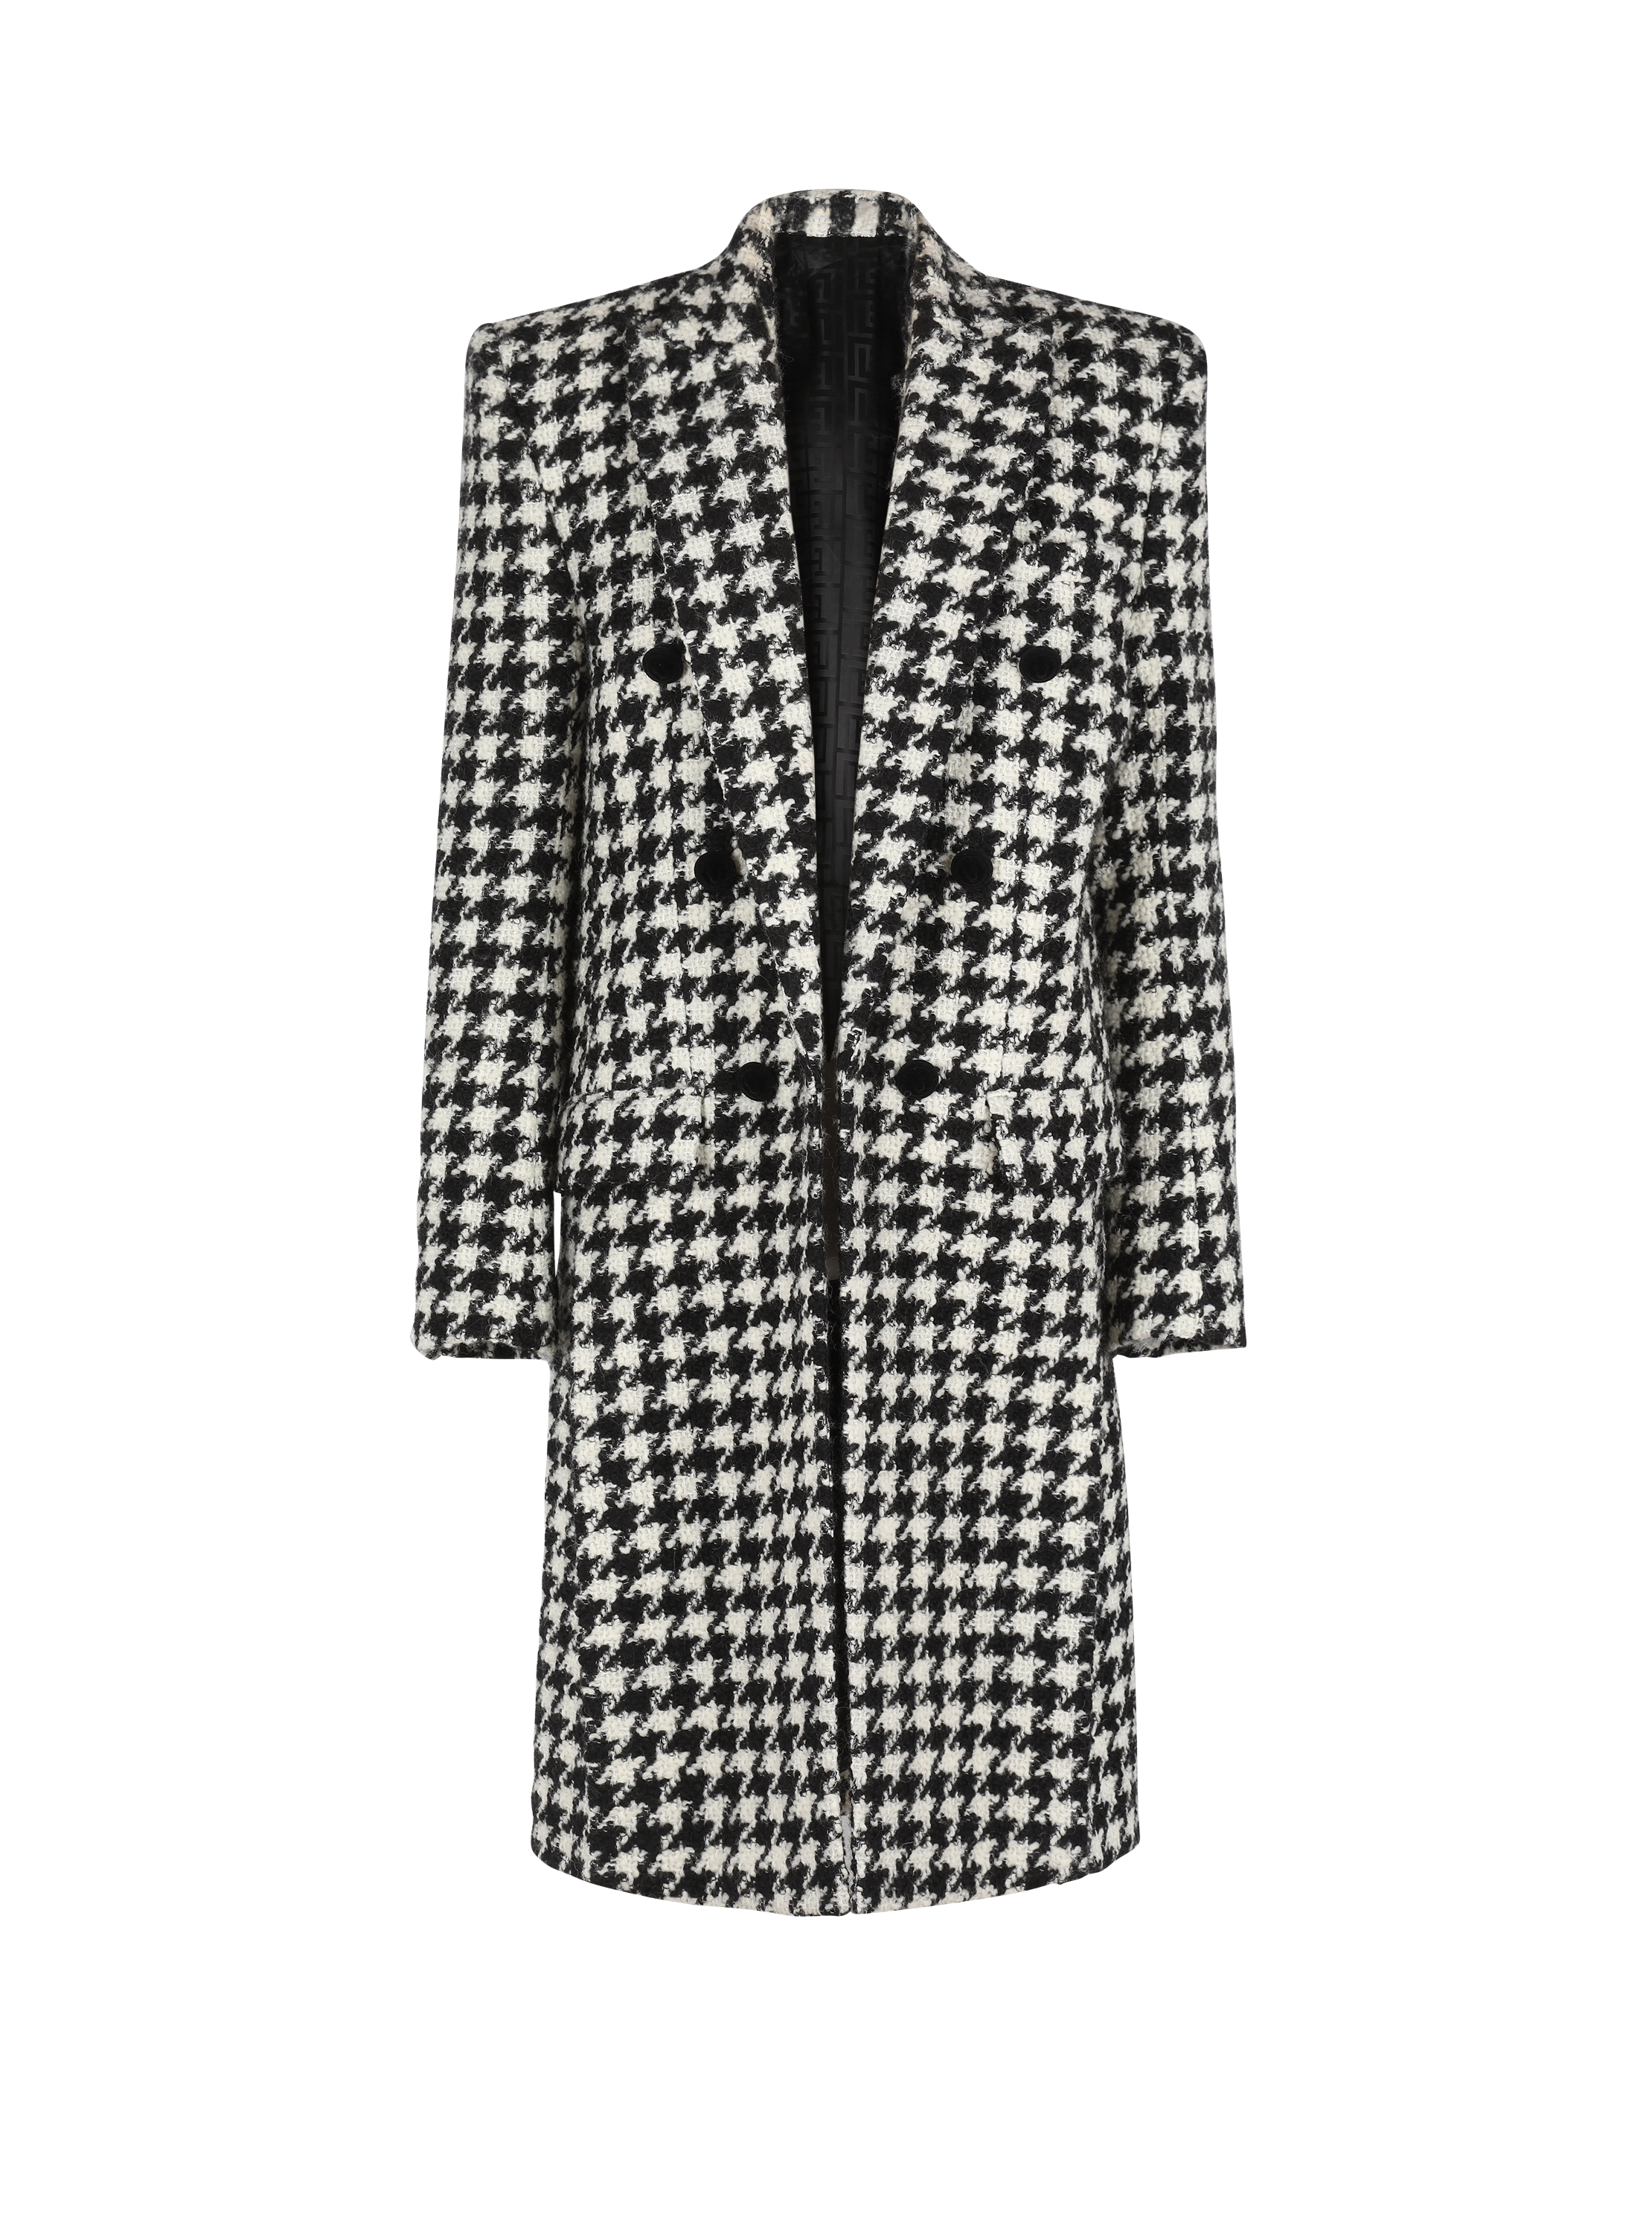 Unisex - Six-button wool coat with detachable inset jacket